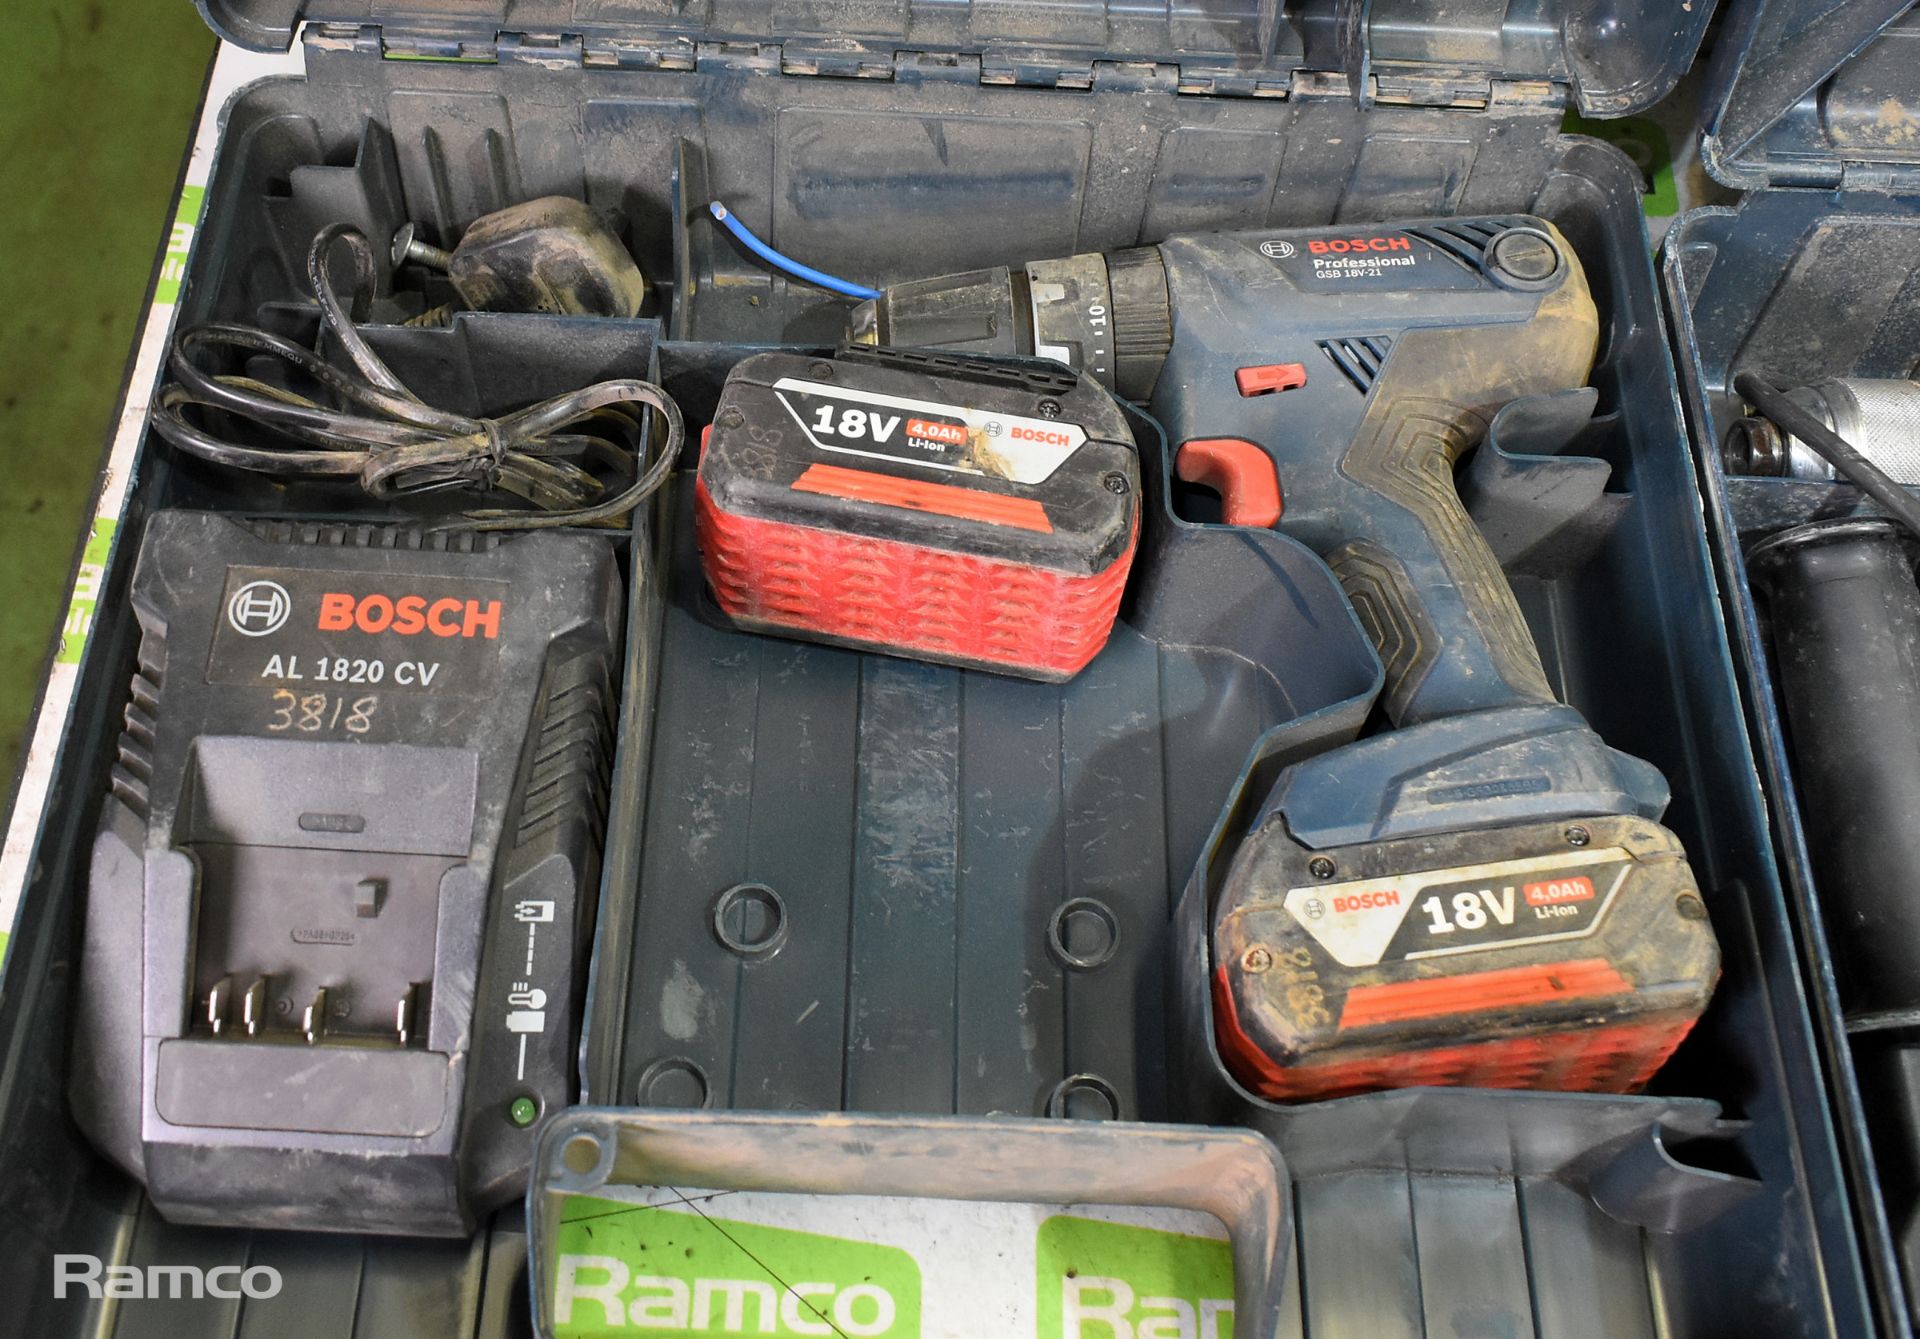 Bosch GSB 20-2RE electric impact drill with case, Bosch Professional GSB 18V-21 cordless combi drill - Image 2 of 7